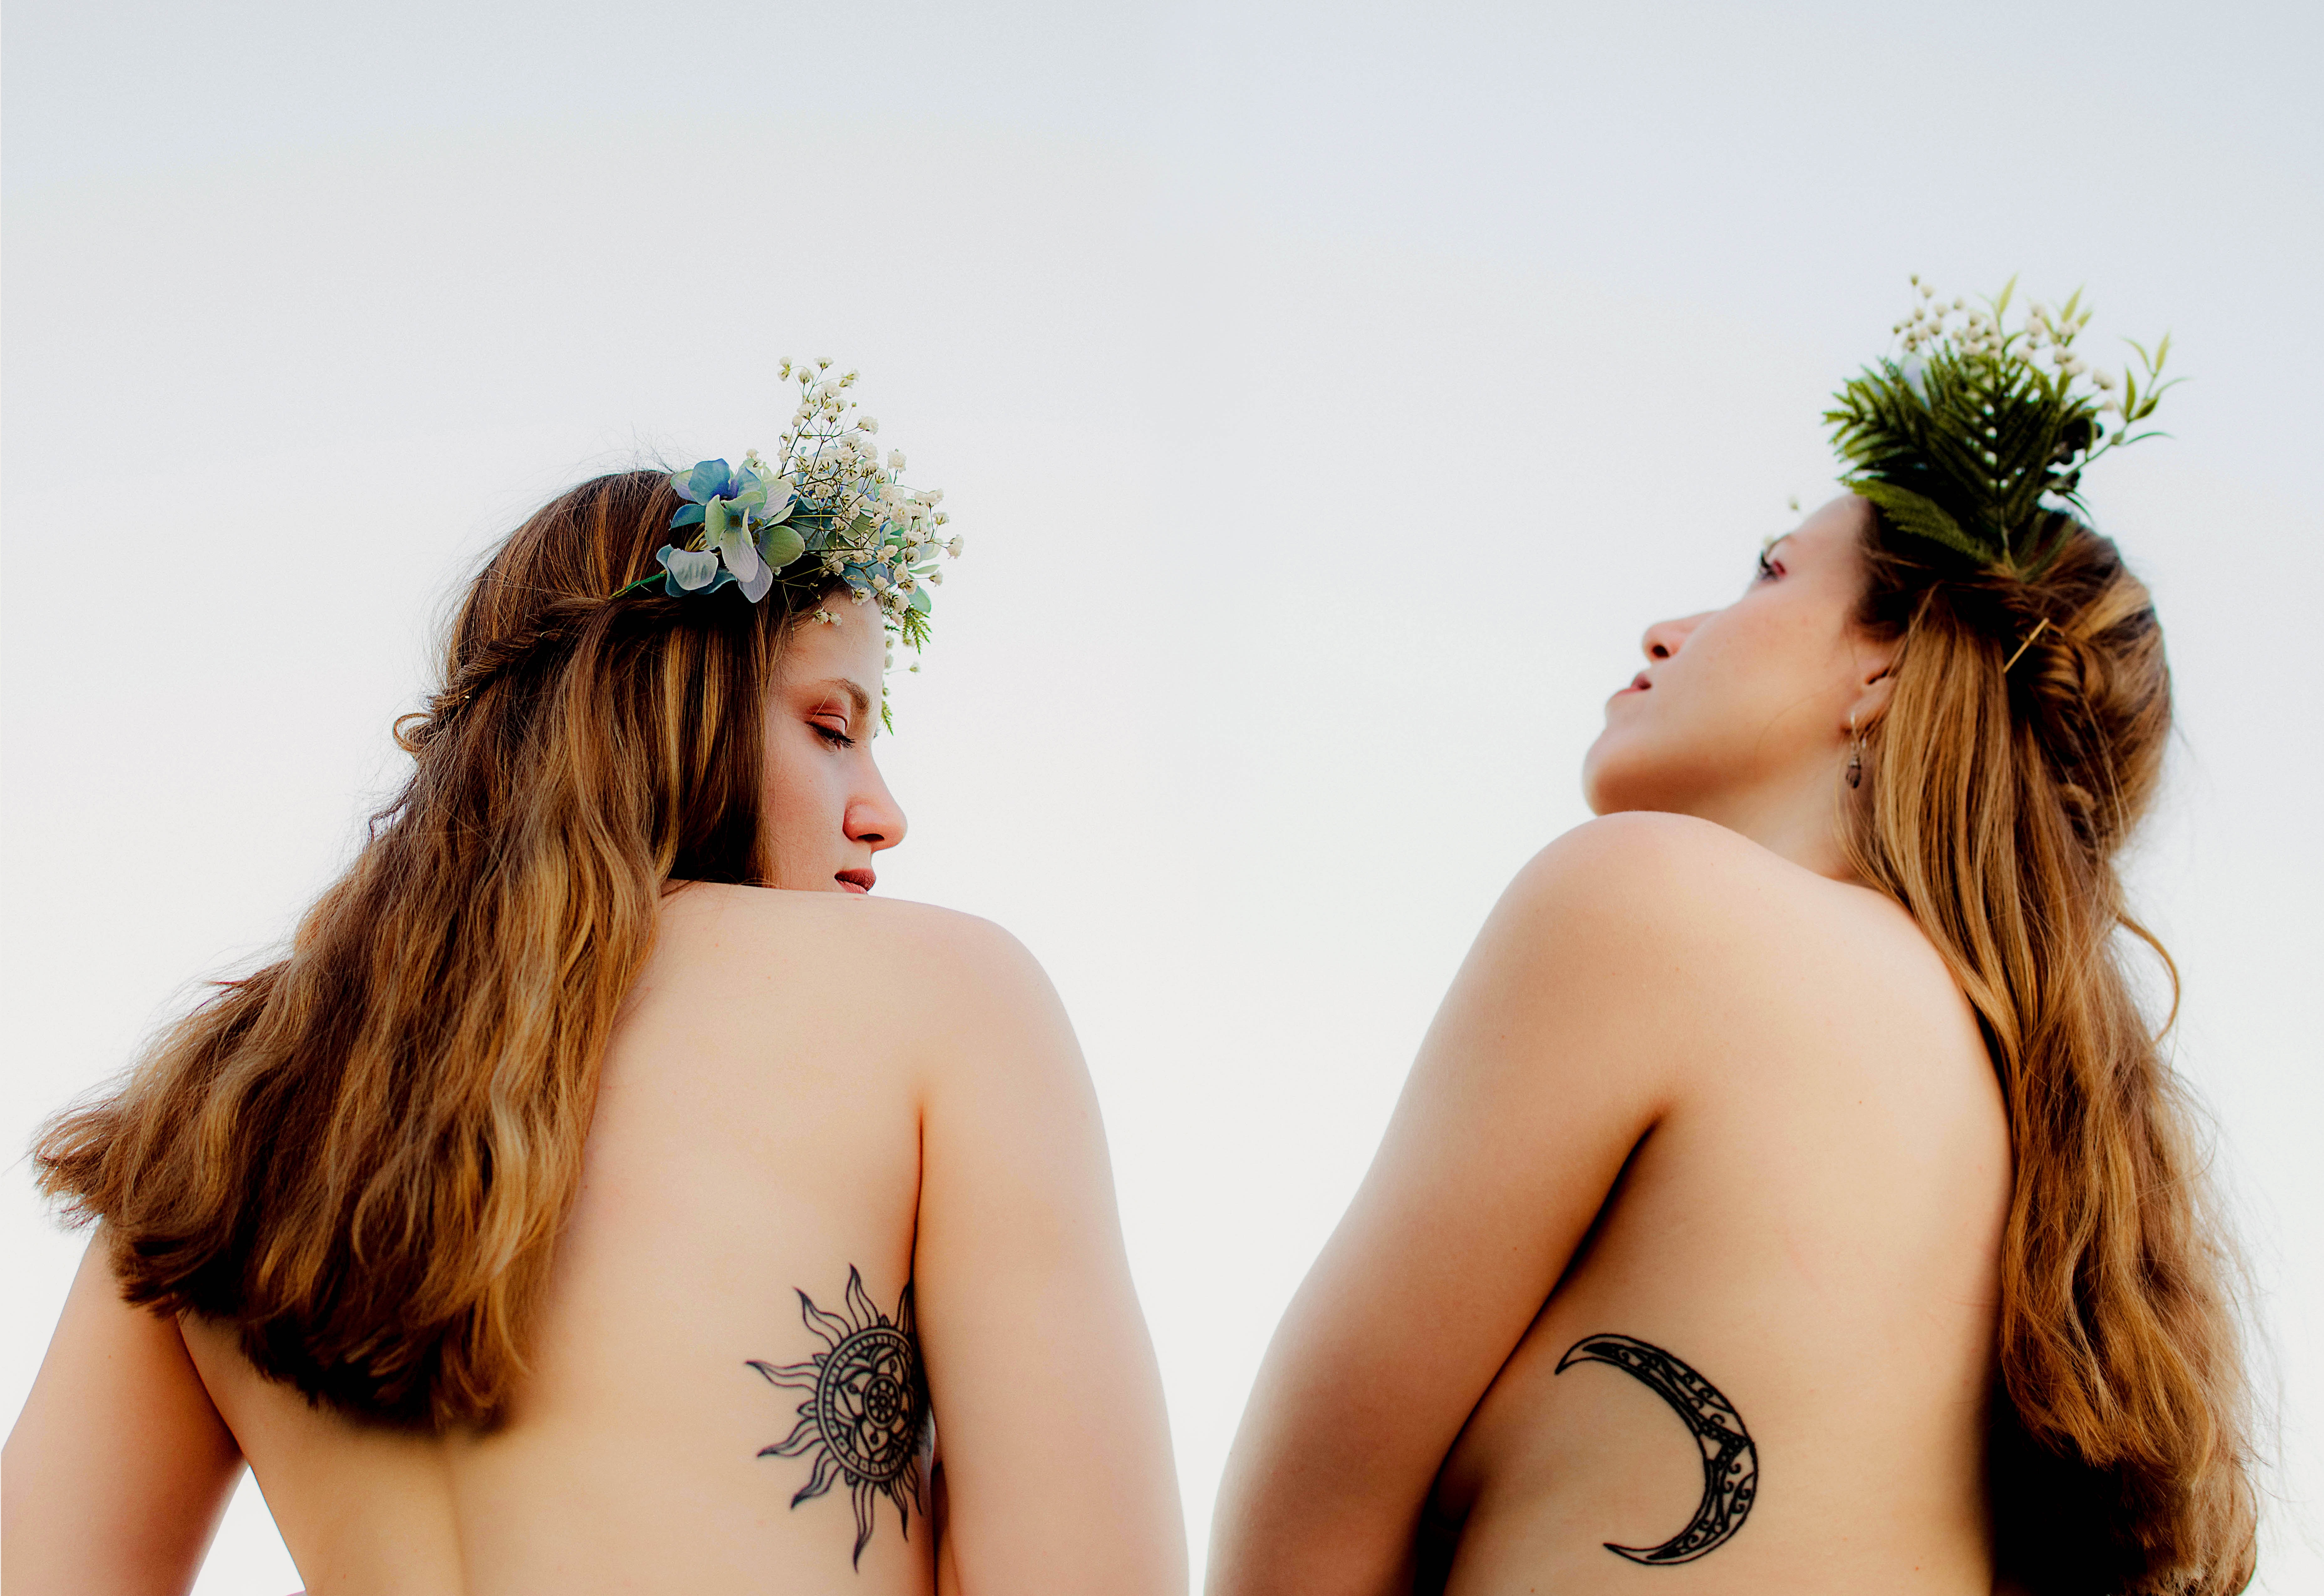 Women In Naturism - ‘Clothing Optional’ Body Positive Activity Day